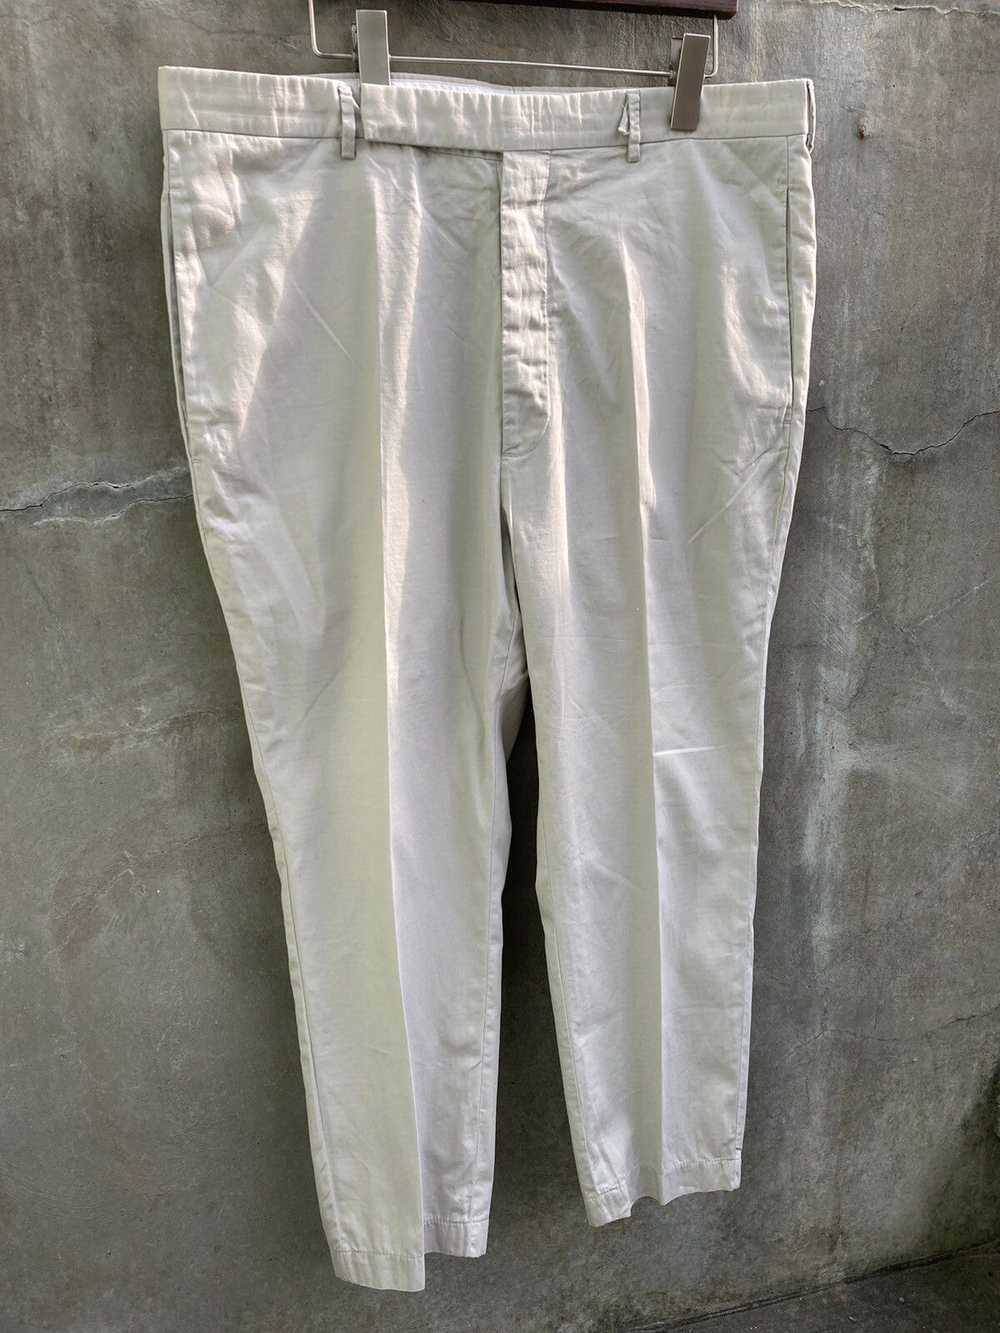 Rick Owens SS19 Babel Oyster Cotton Trousers - image 2